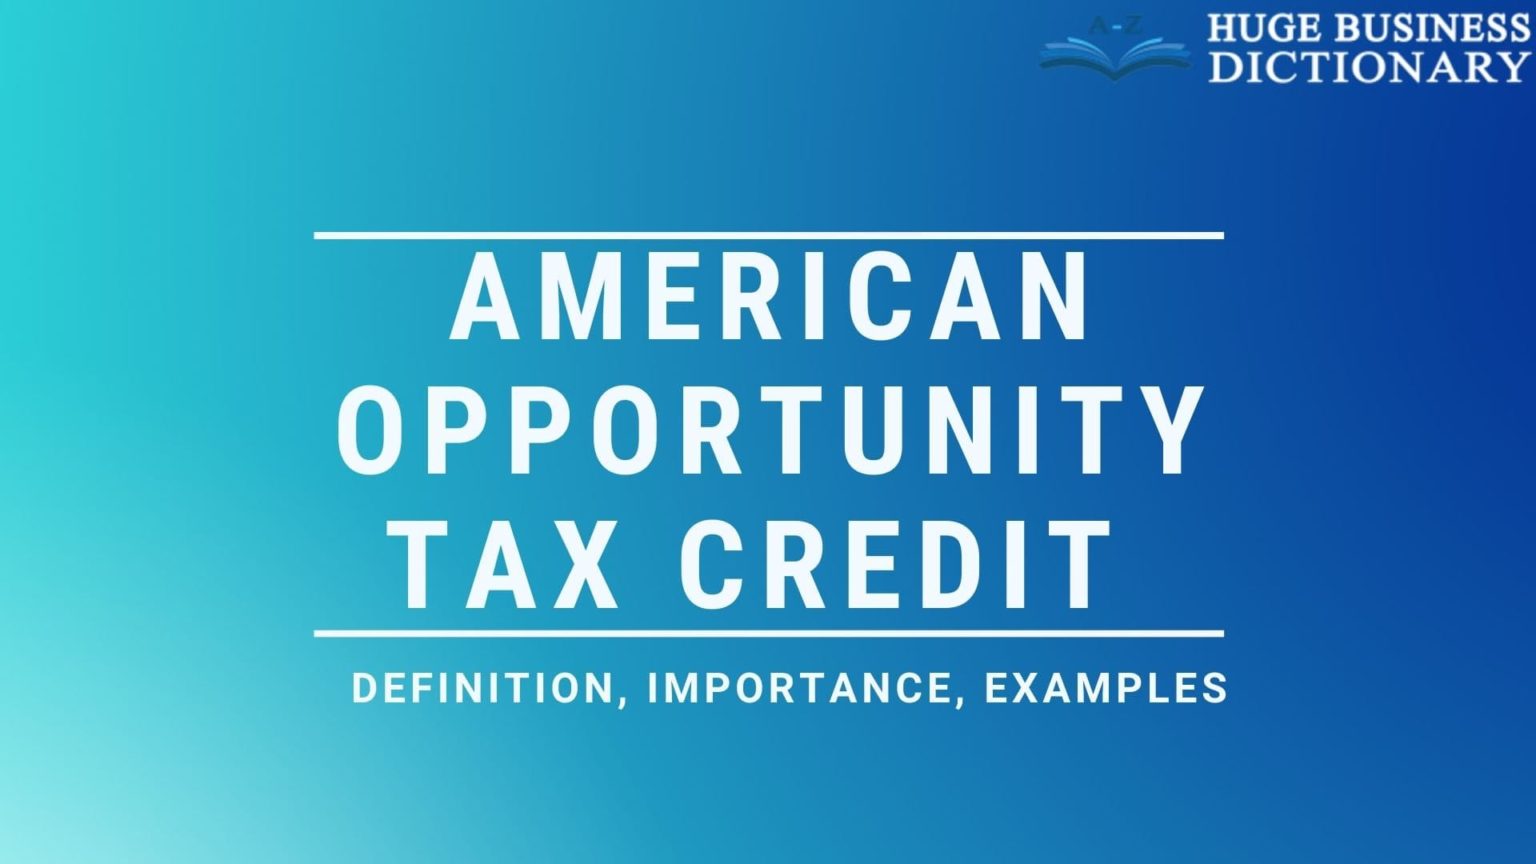 American Opportunity Tax Credit (AOTC) Huge Business Dictionary